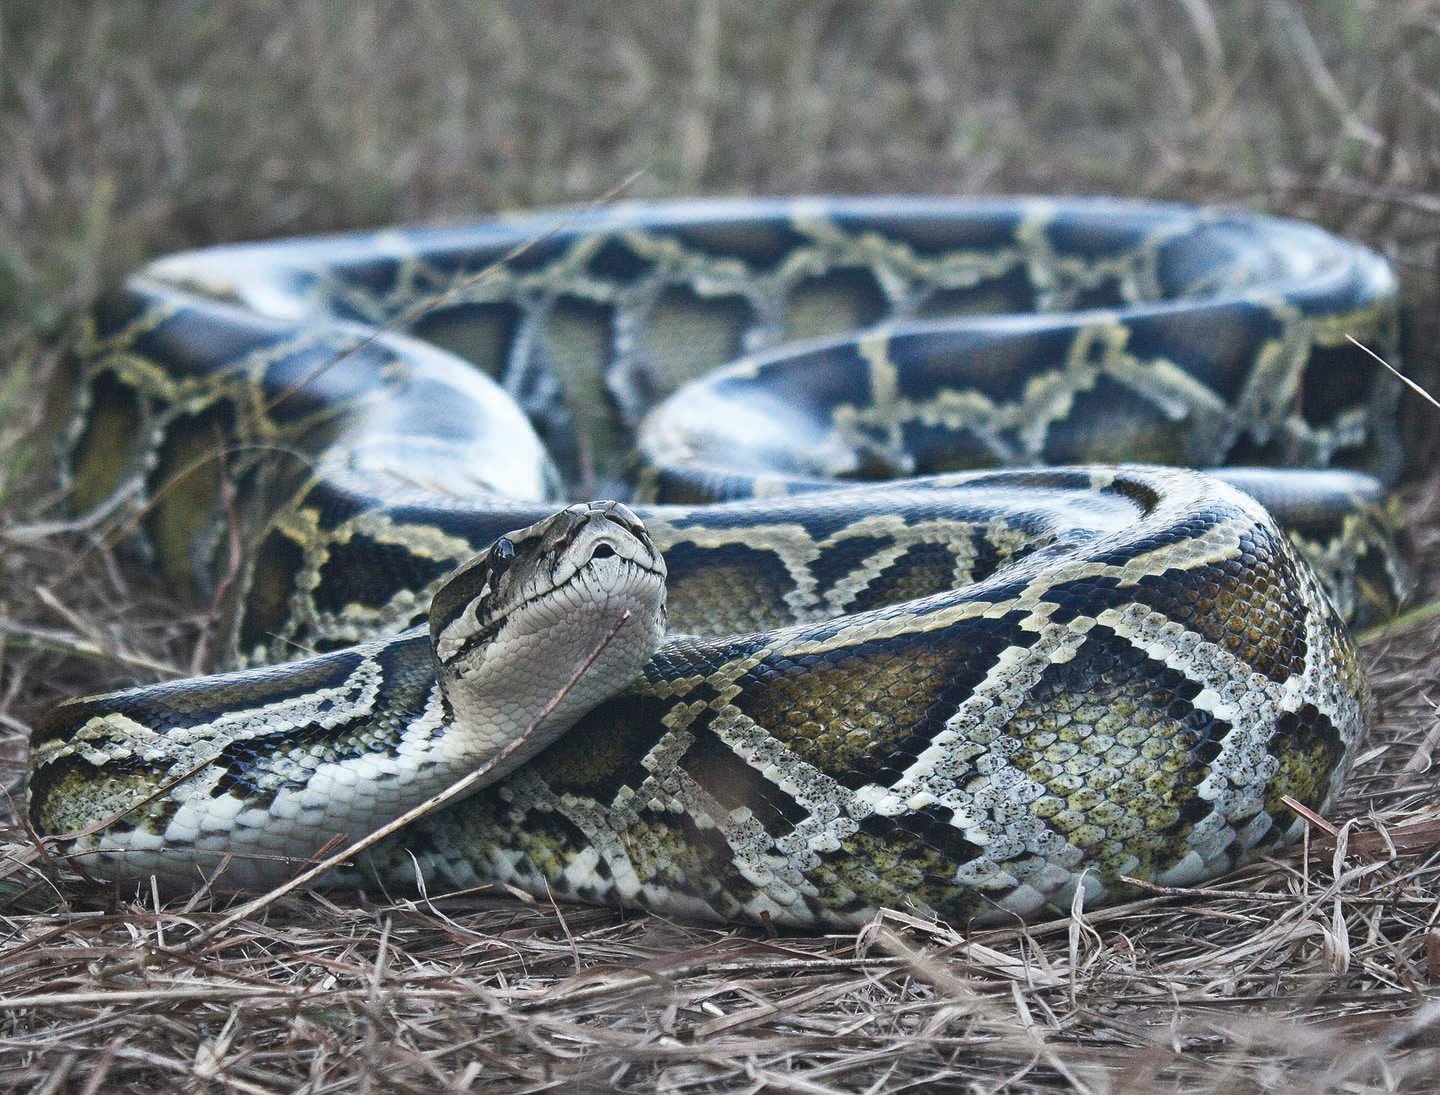 This photo is of a Burmese python.